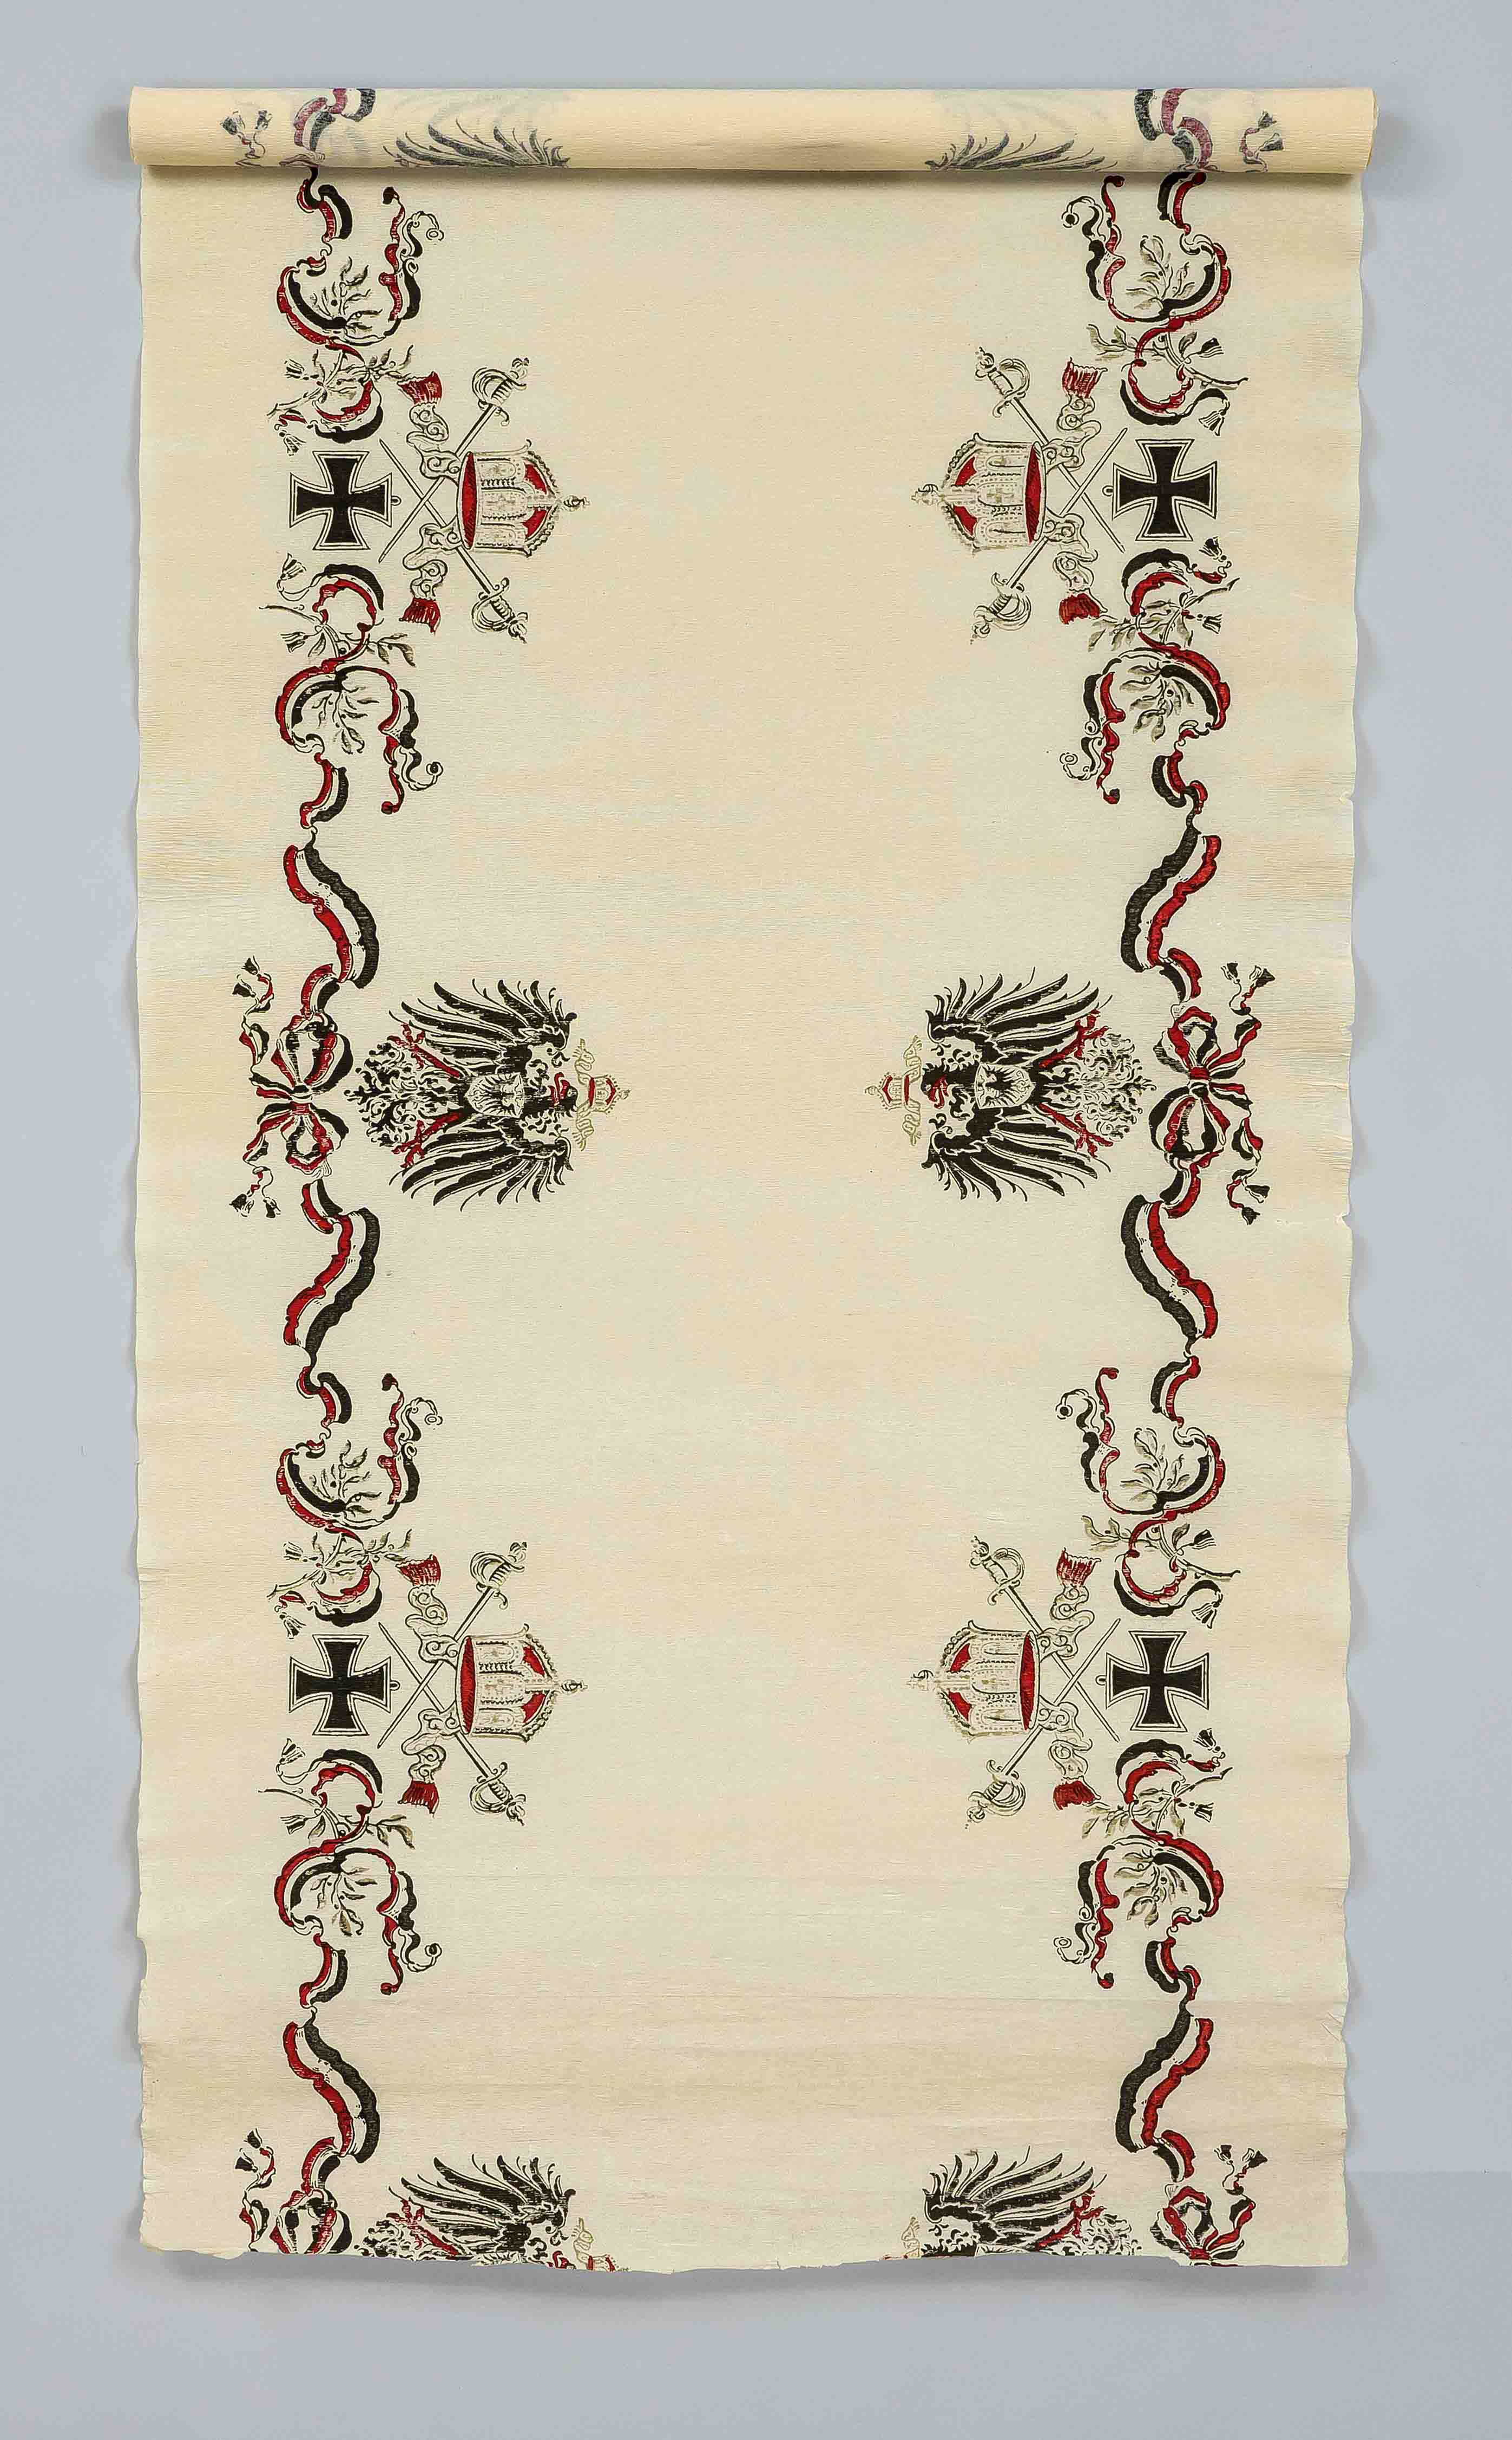 Militaria table cover?, 19th century, Prussian. Crepe paper with printed decoration, w. 50 (on